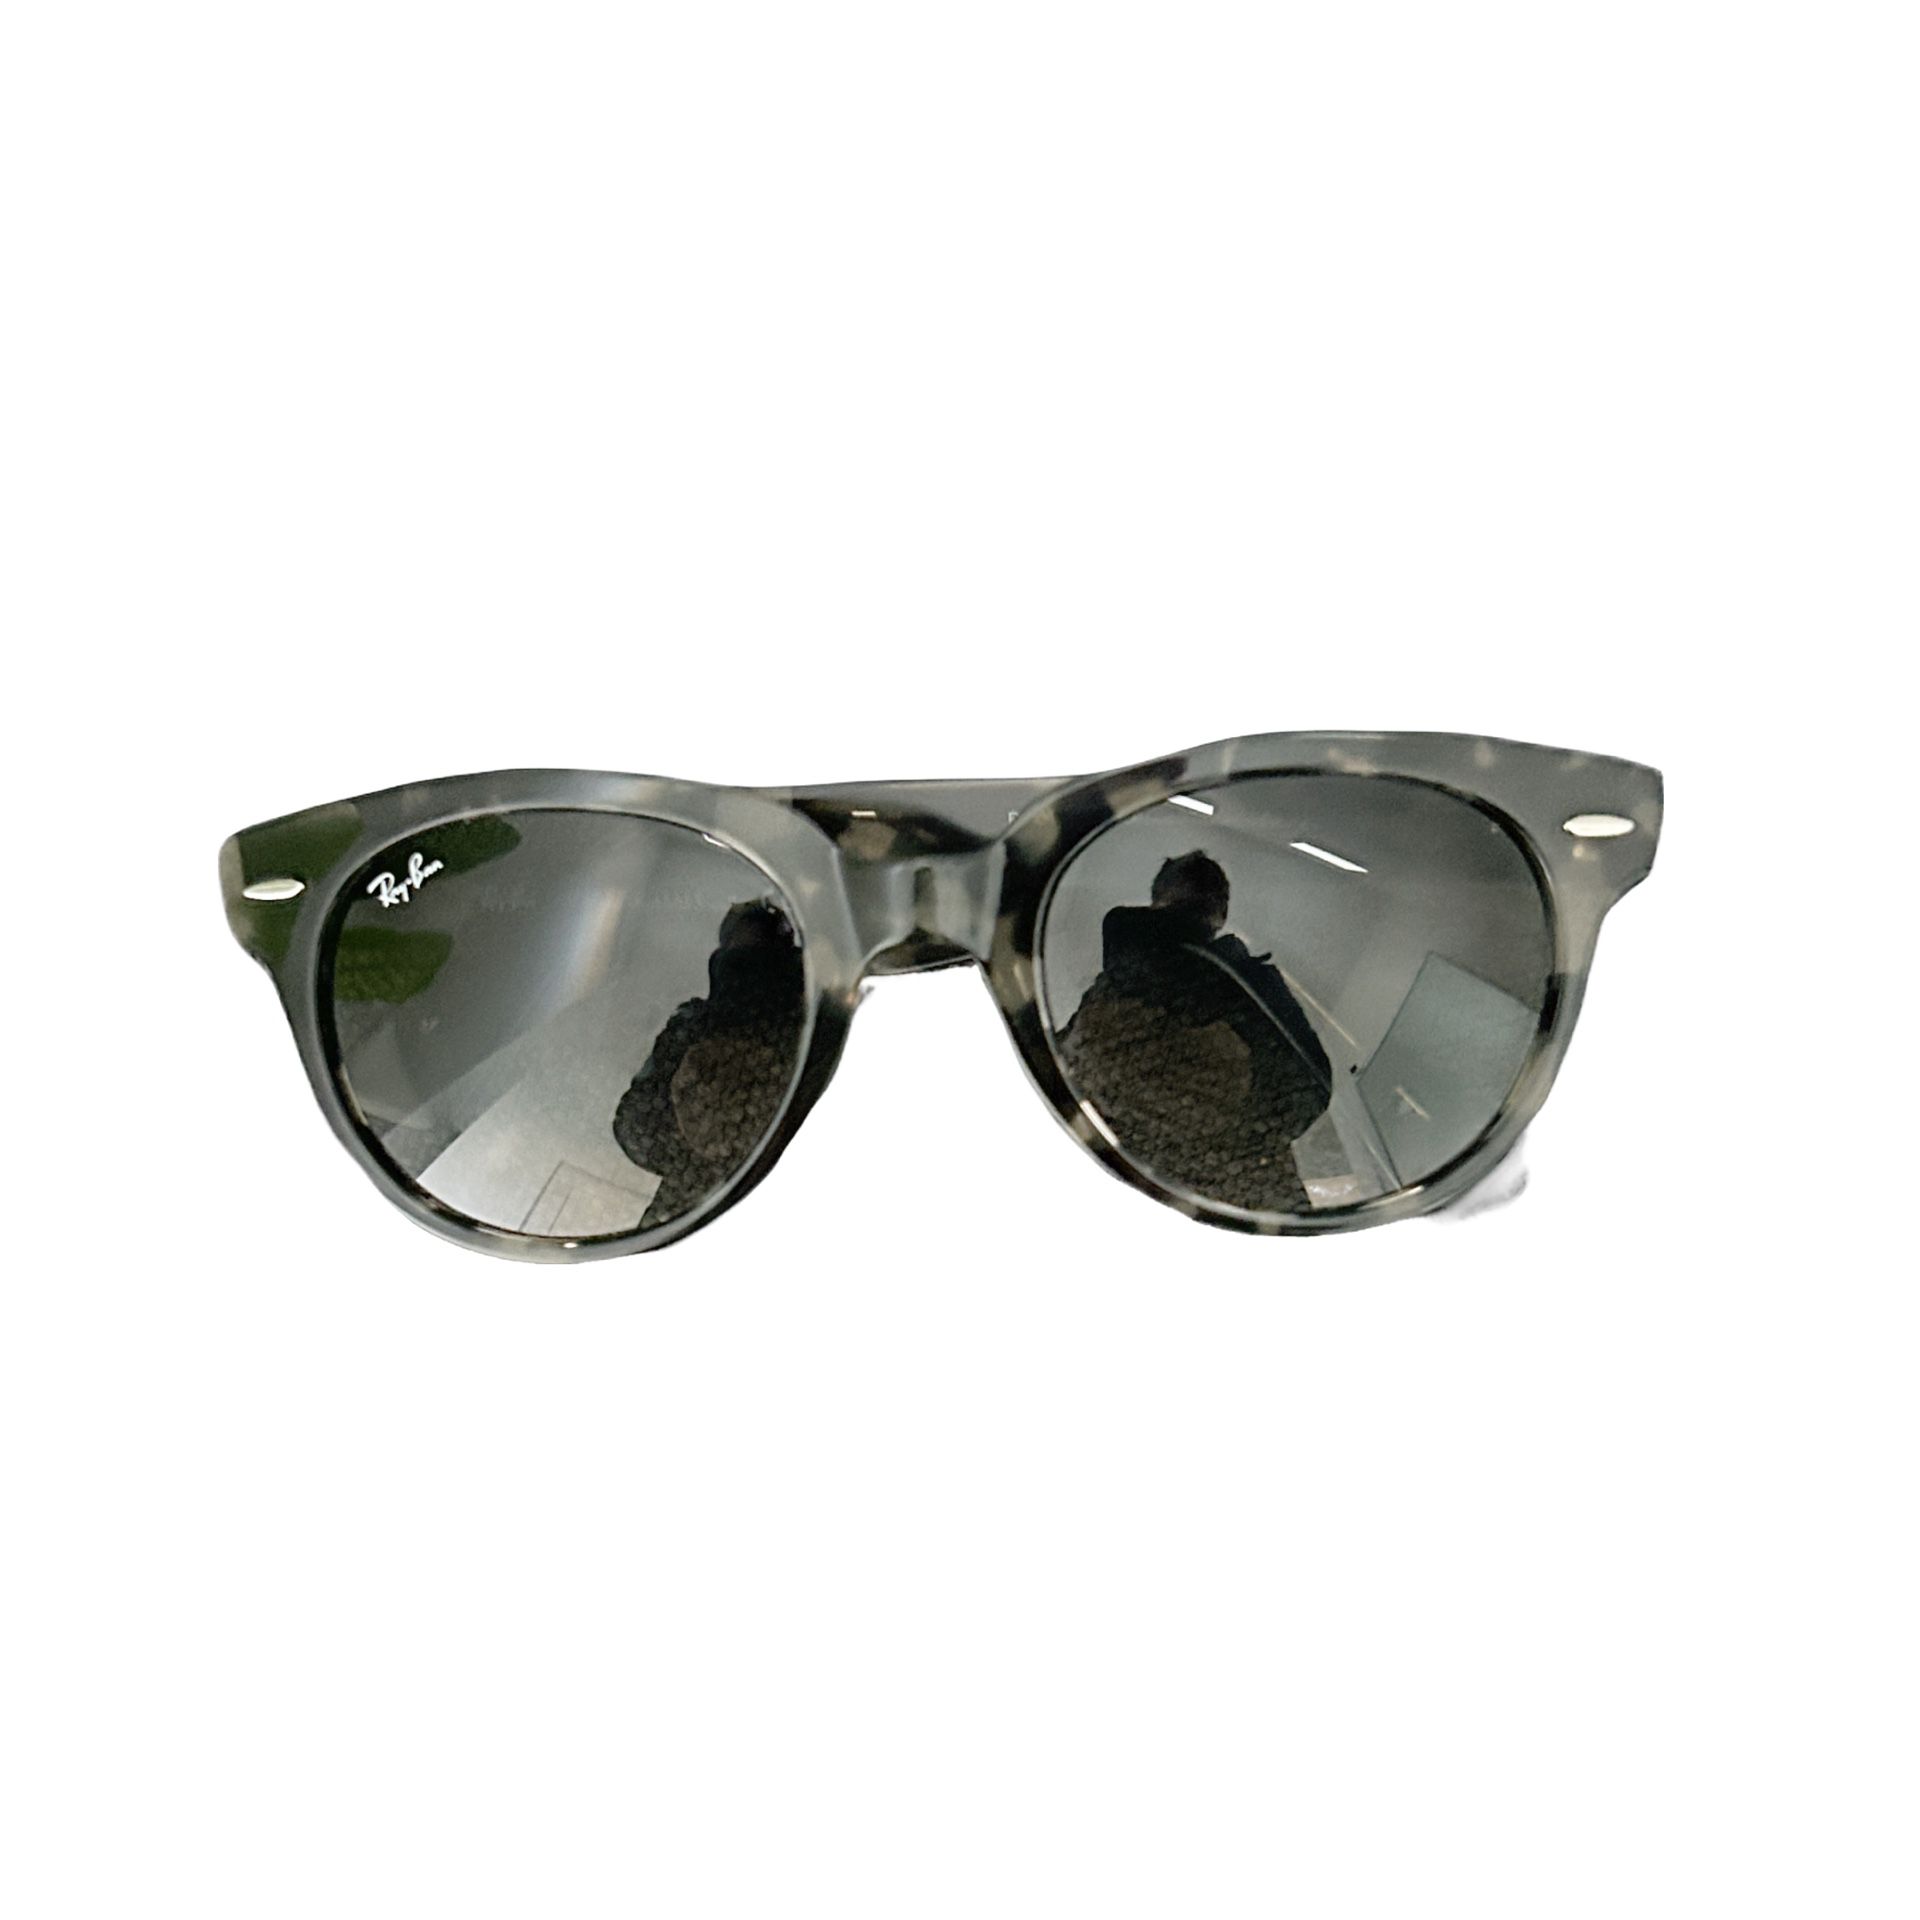 Rey-Band Orion Sunglasses